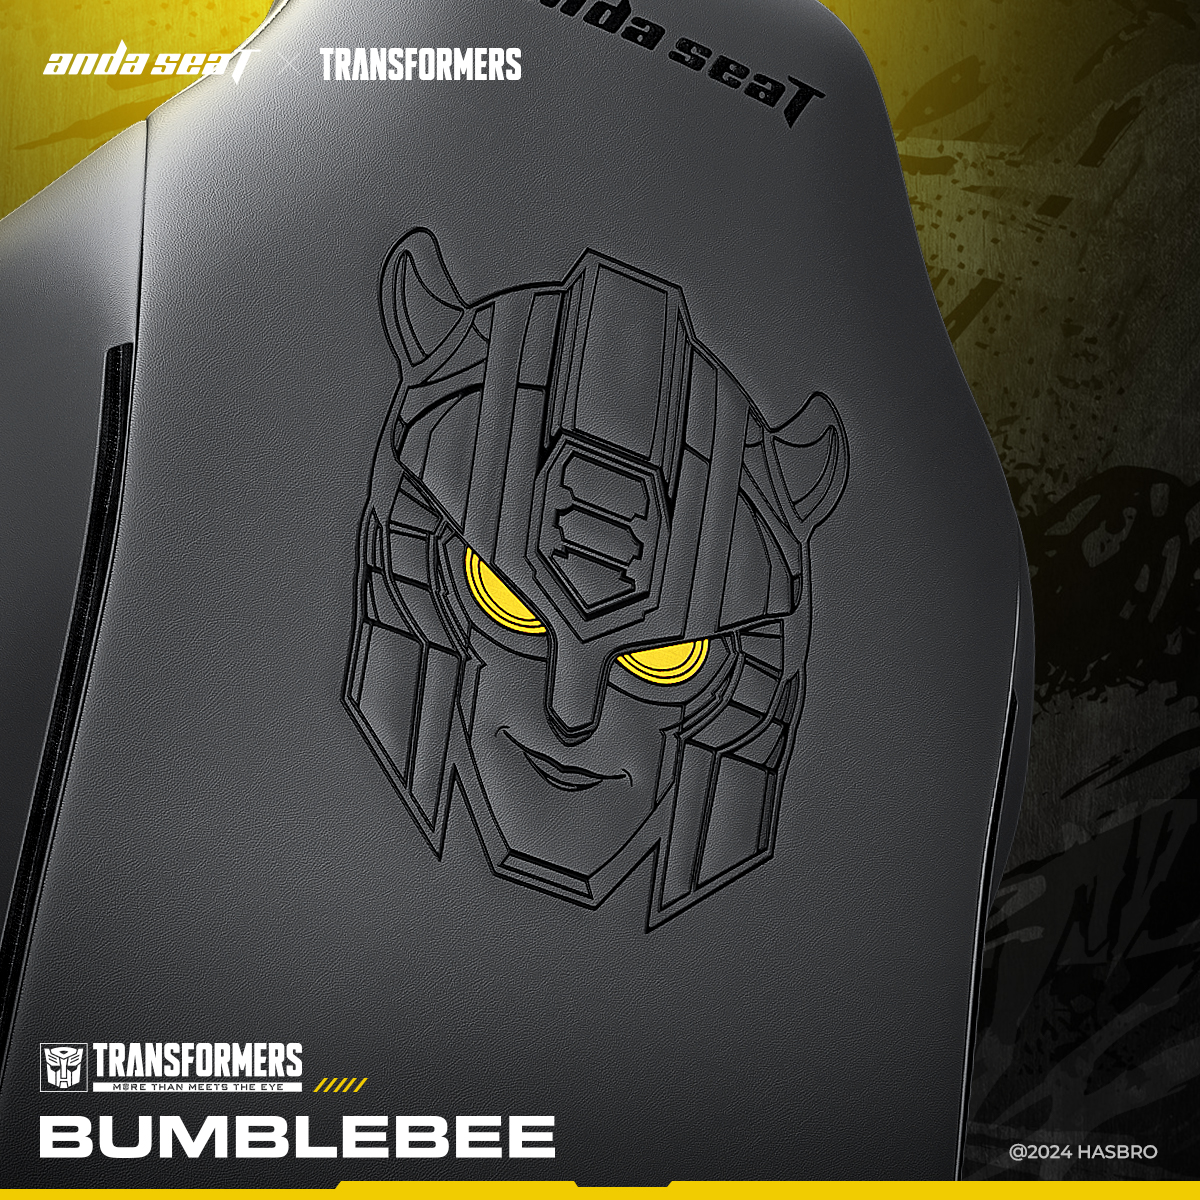 Bumblebee heres！WWWWWWWWW~ Check Now: shorturl.at/psLX2 #andaseat #FYP #homeandaseat #GamingCommunity #bumblebee